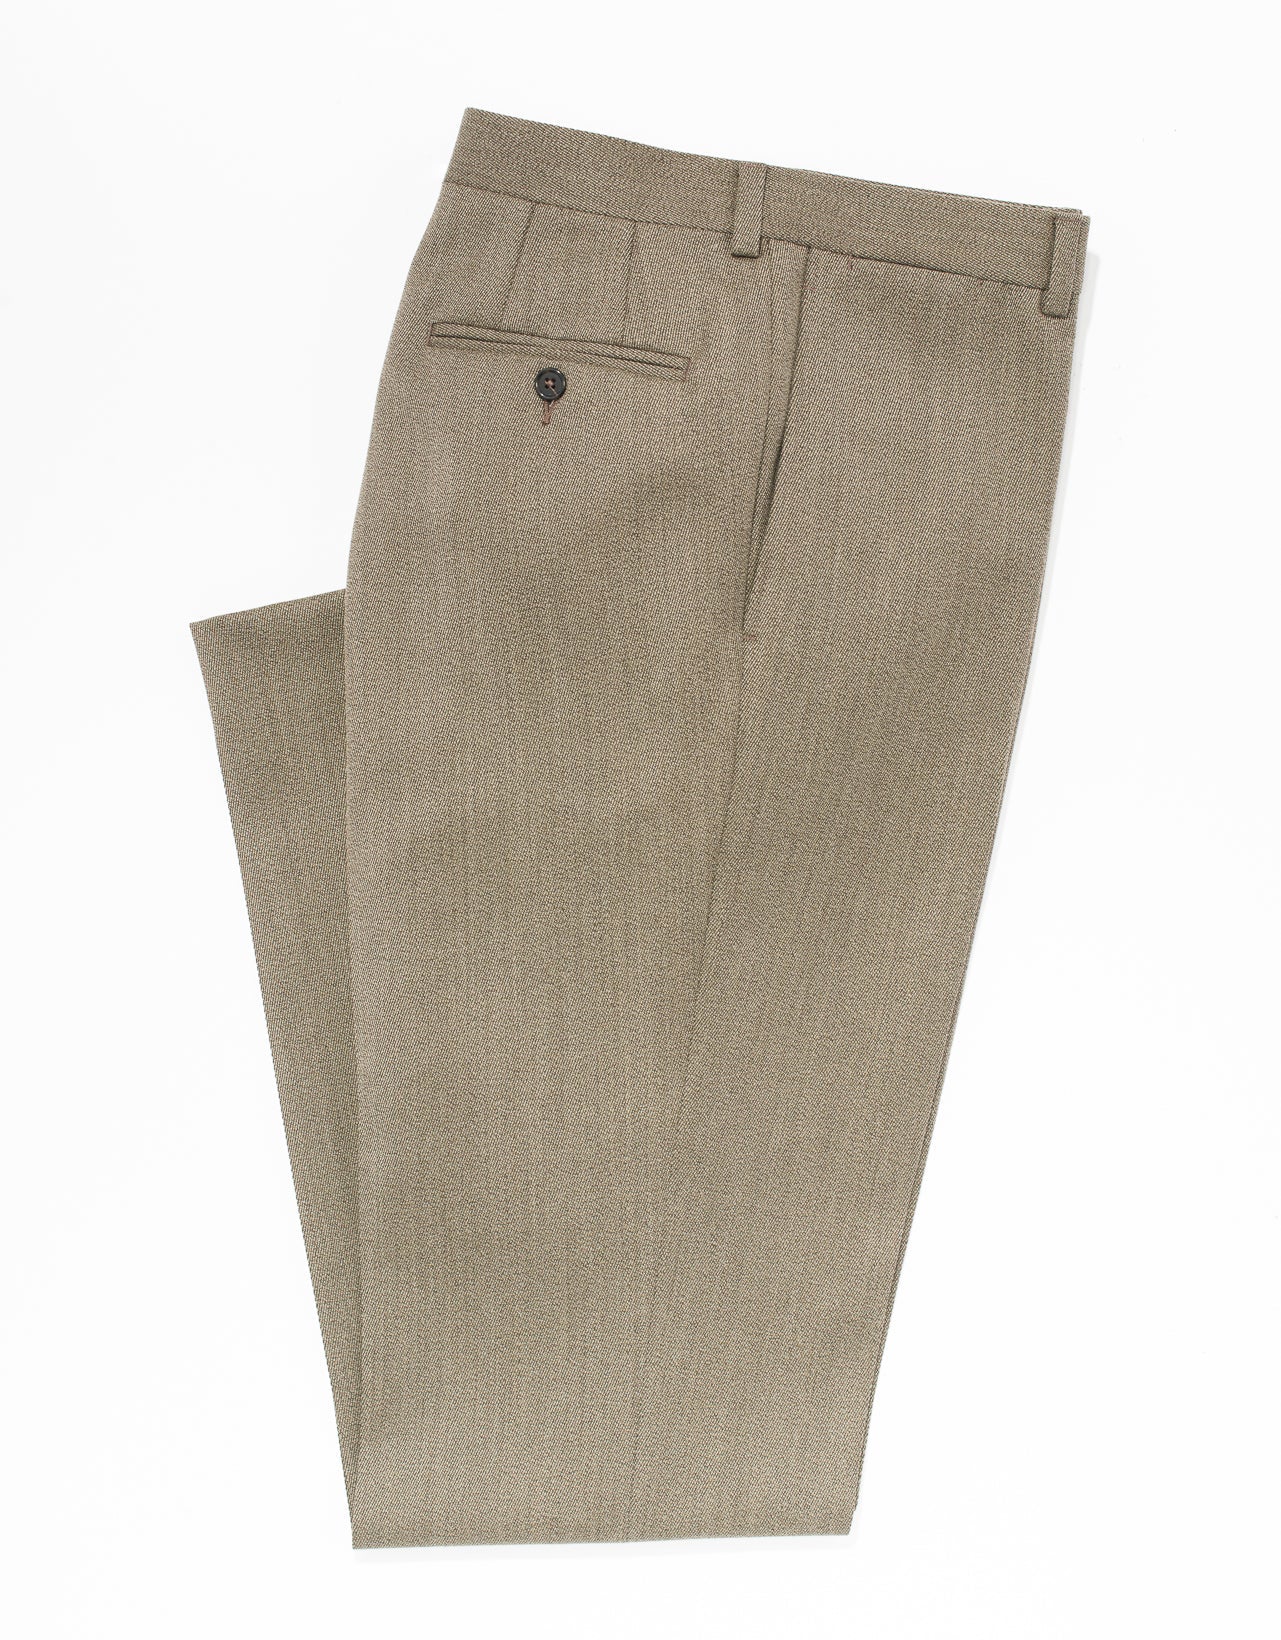 BROWN OLIVE WHIPCORD TROUSERS